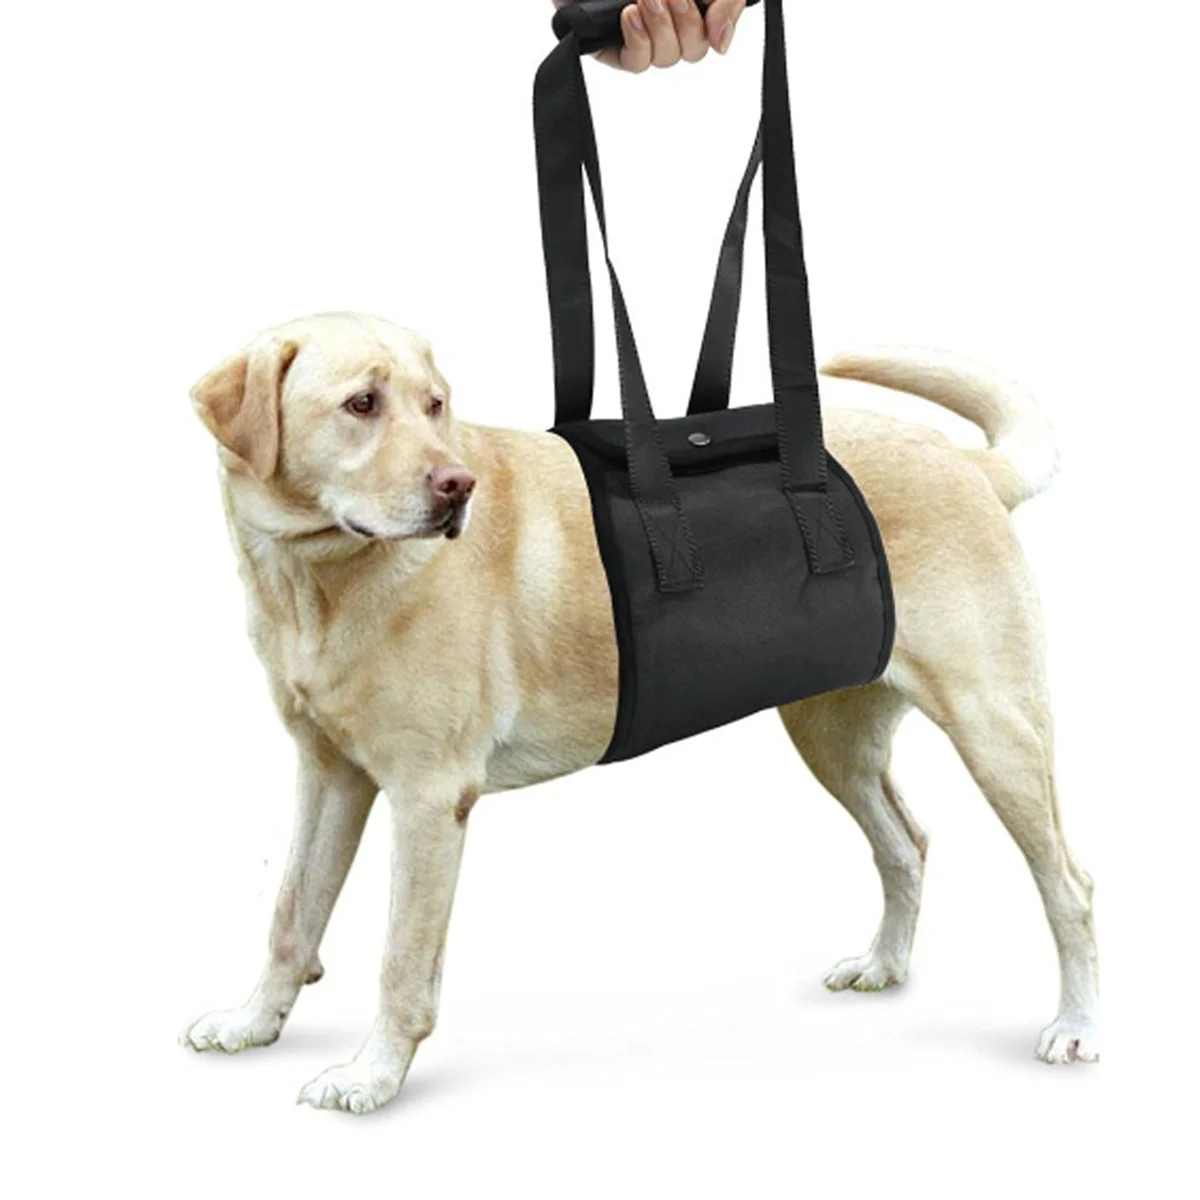 

Dog Harness Support Lift Large Legs Vest Leg Rehabilitation Hind Dogs Sling Wheelchair Lifting Assist Backpack Hook Emotional